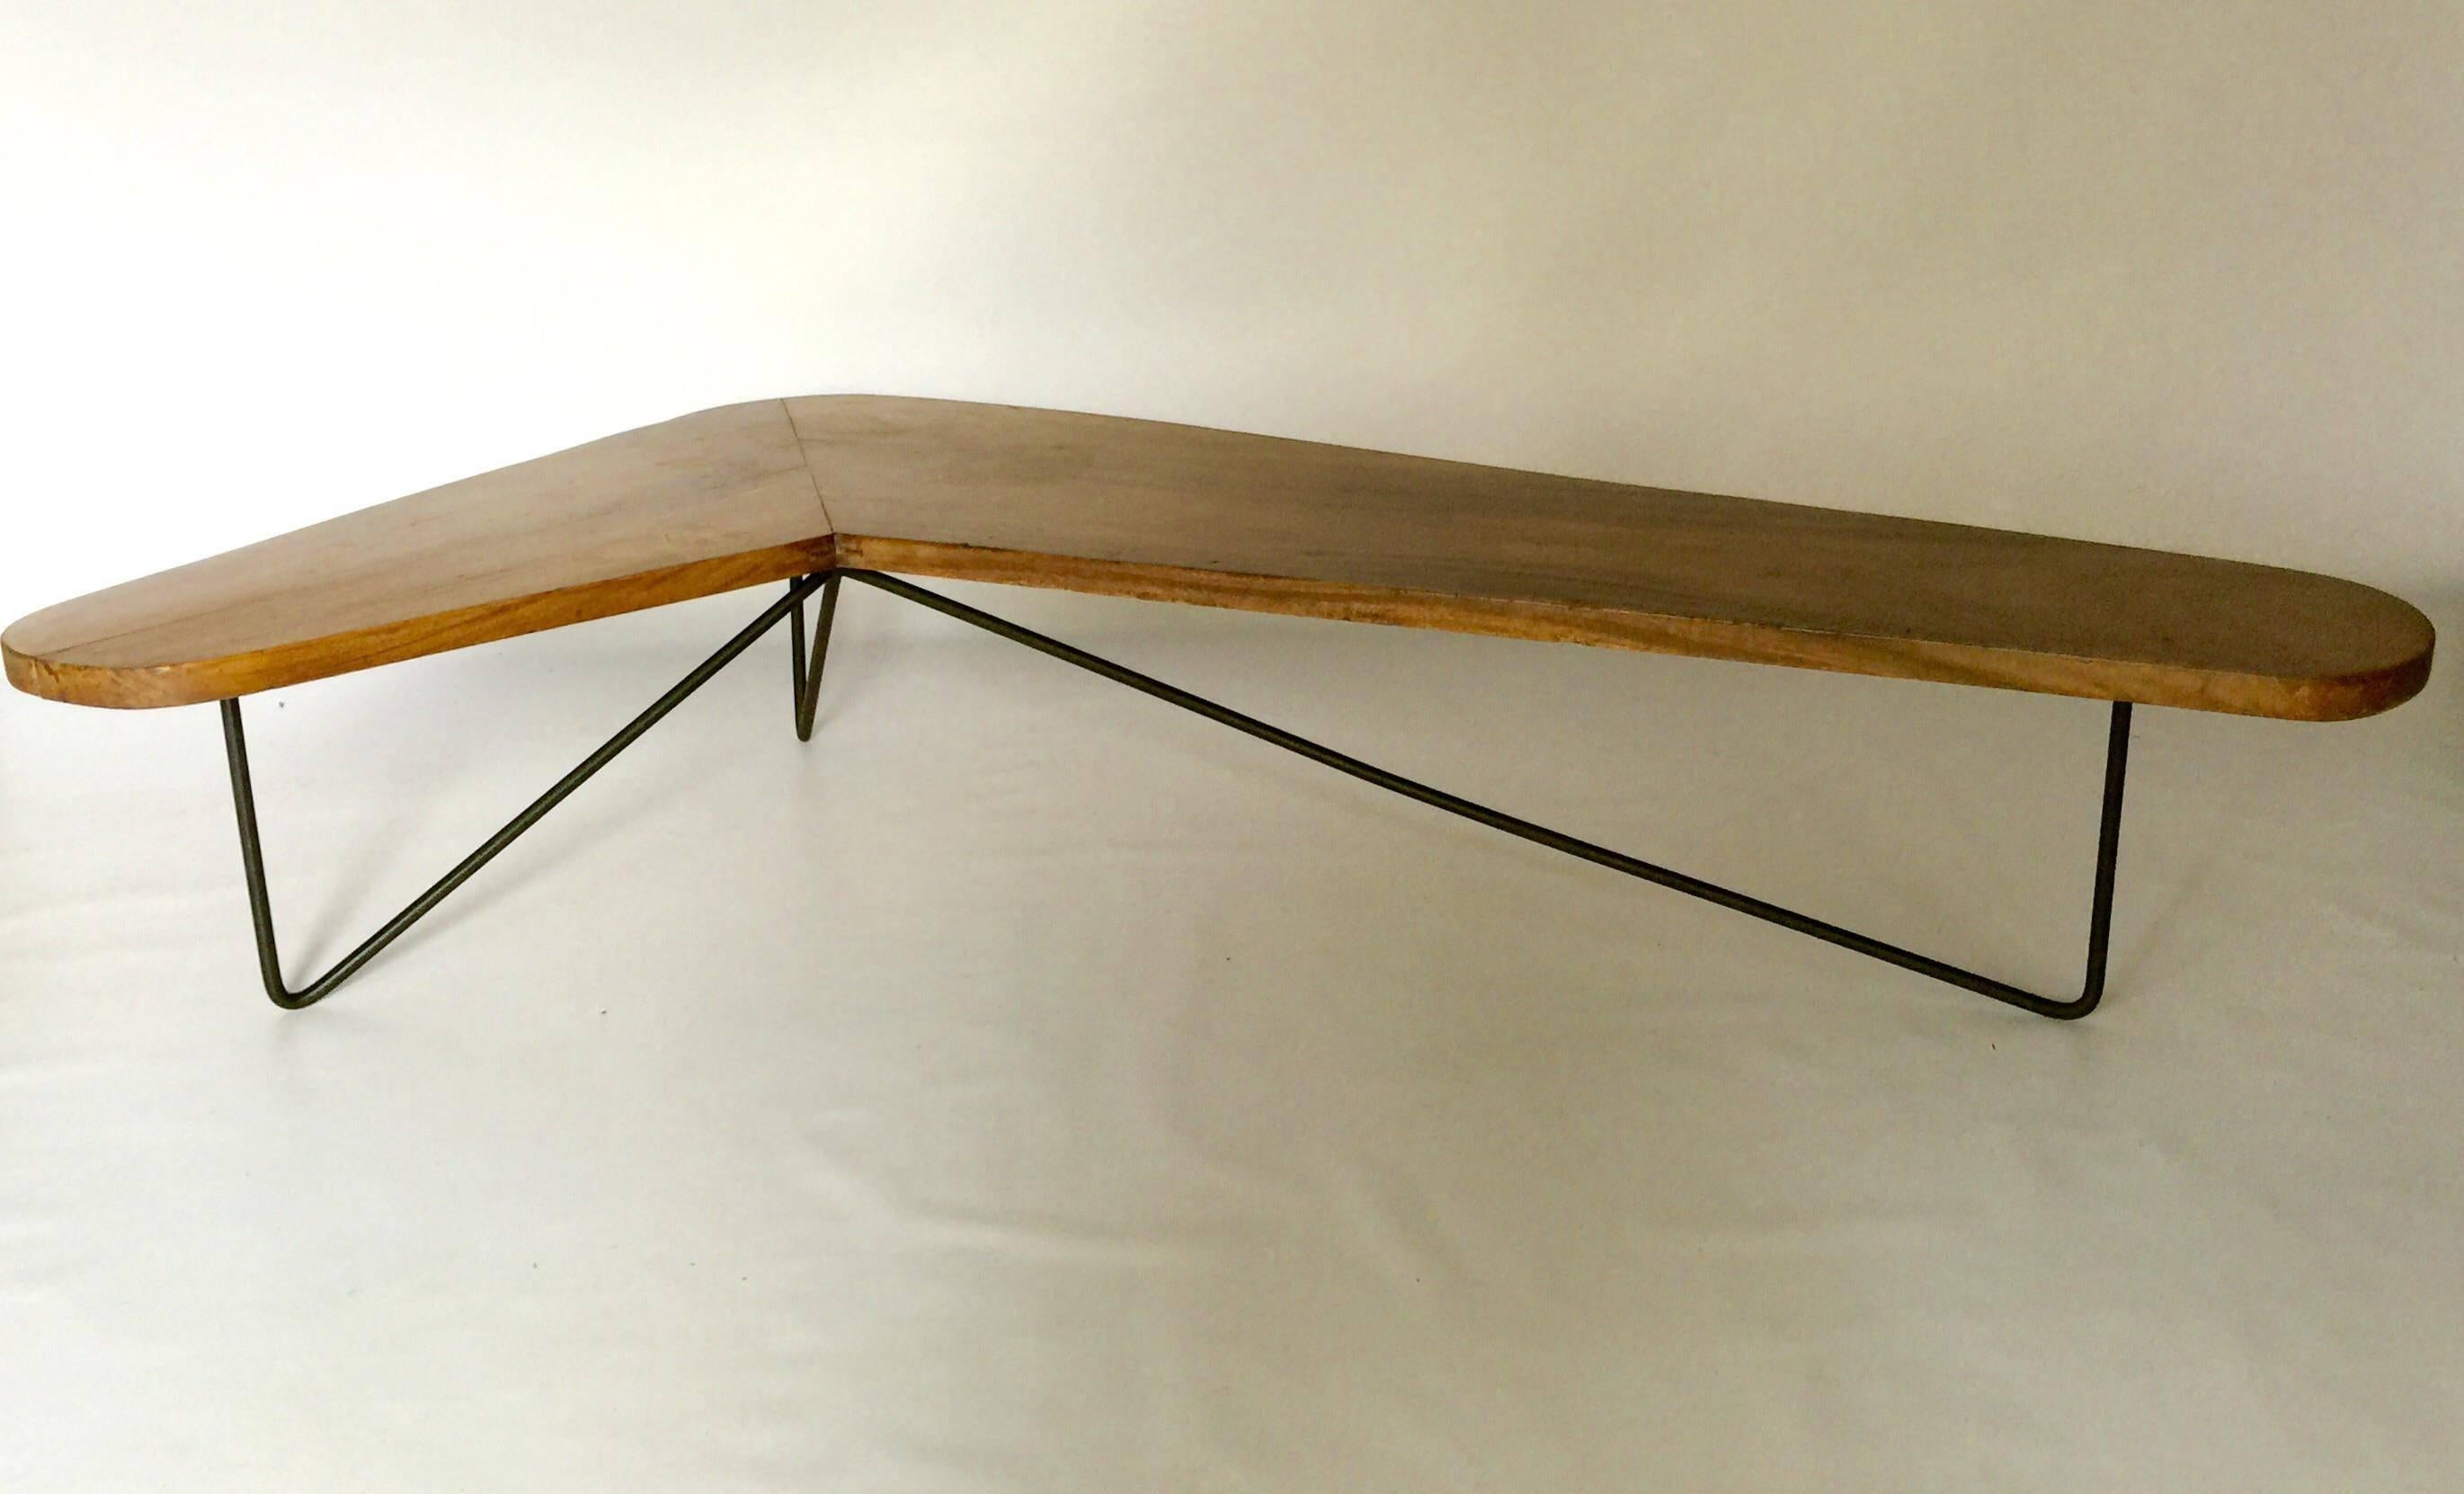 Rare 1950s Luther Conver biomorphic/boomerang coffee table. The top is monkey pod, rather than Conover's typical mahogany; this piece was likely done as a private commission. Base is constructed of 1/2